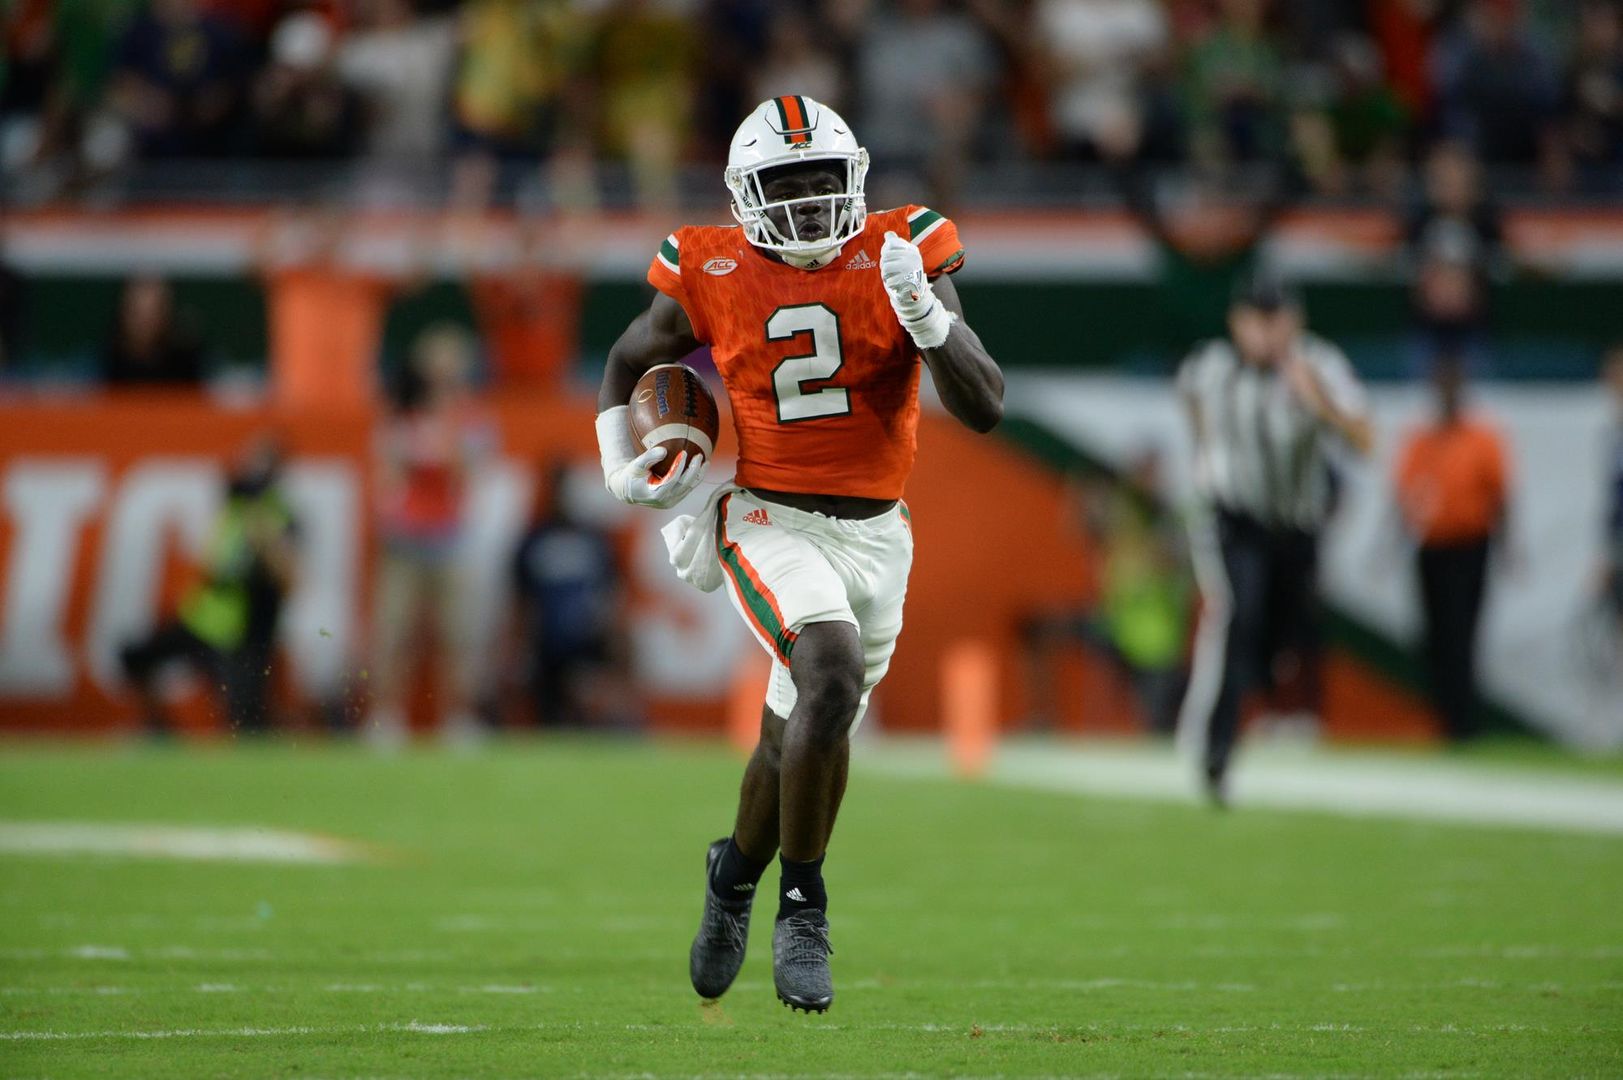 Canes Football Players to Watch: Defense